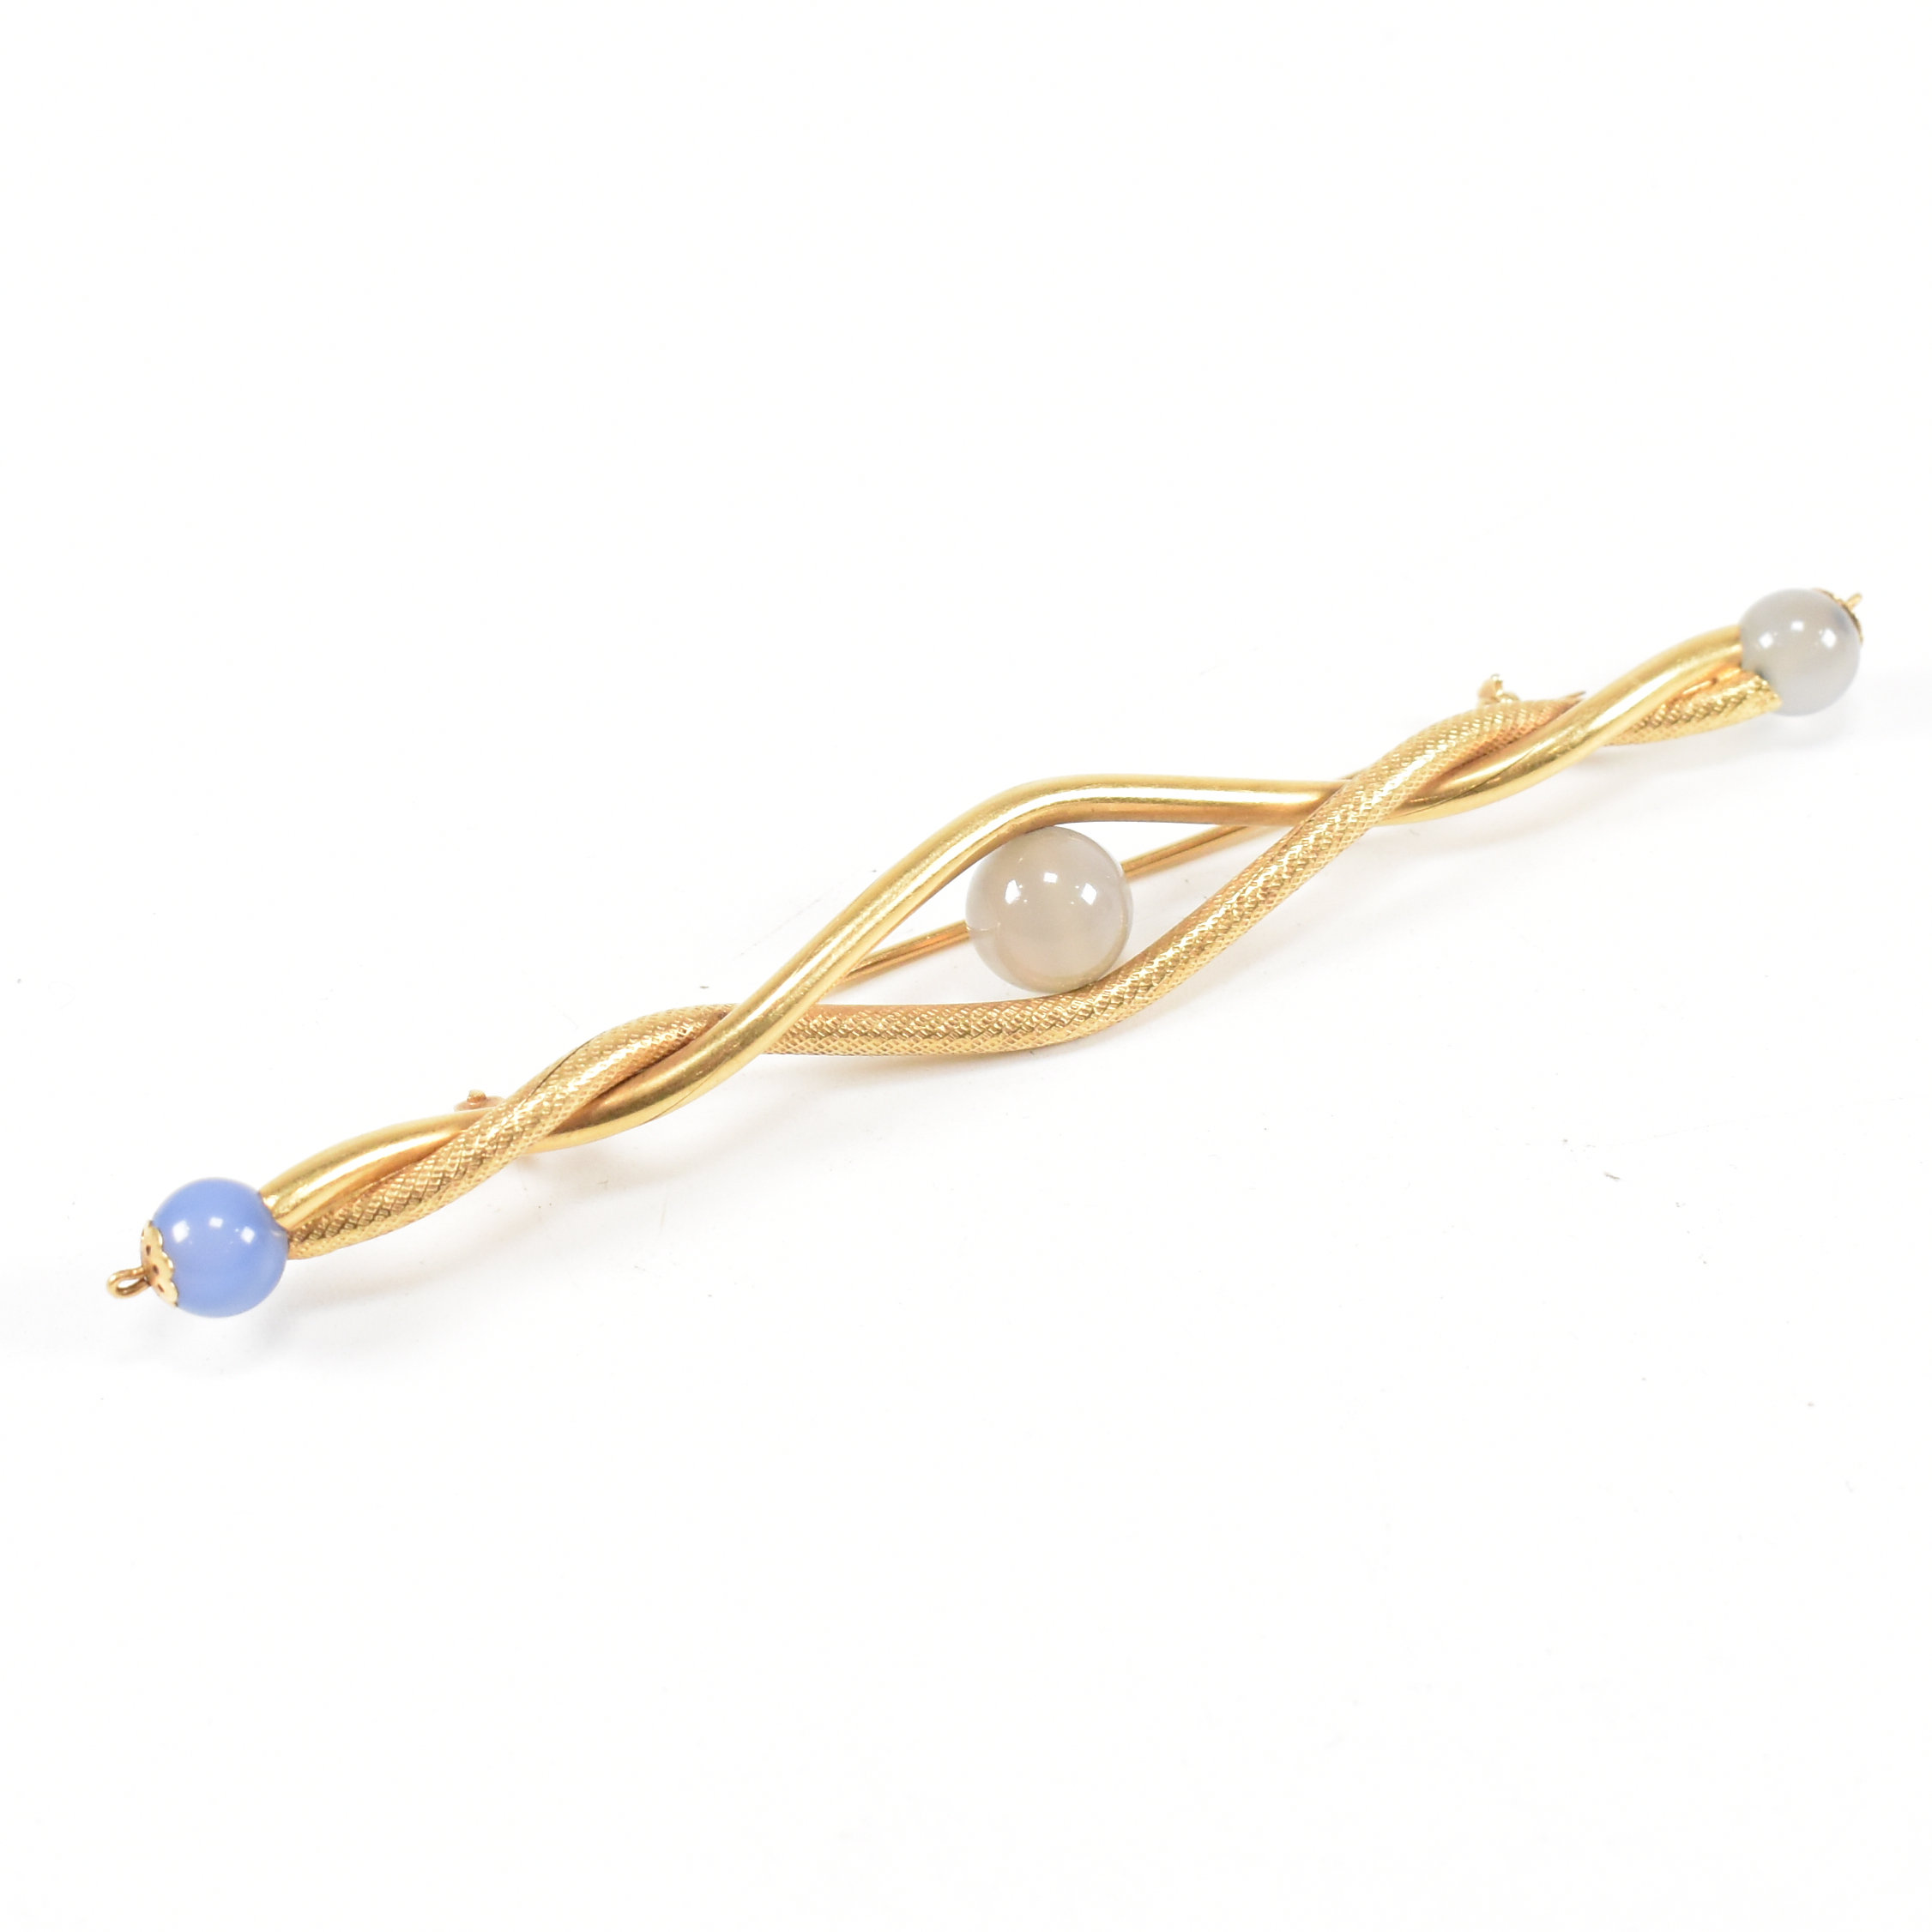 VINTAGE 18CT GOLD & CHALCEDONY BROOCH PIN - Image 2 of 7